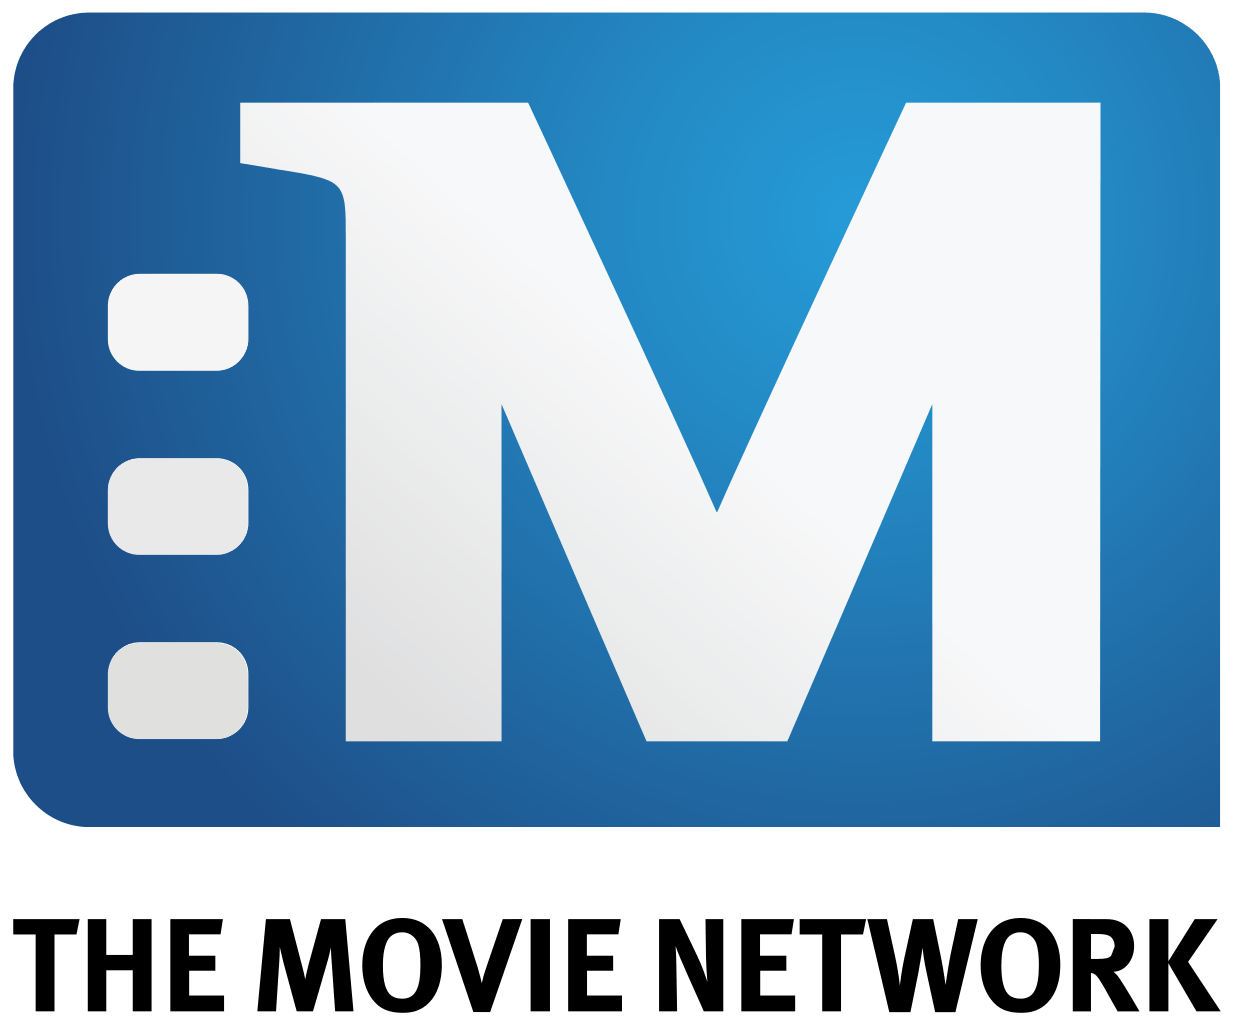 The Movie Channel Logo - The movie network Logos